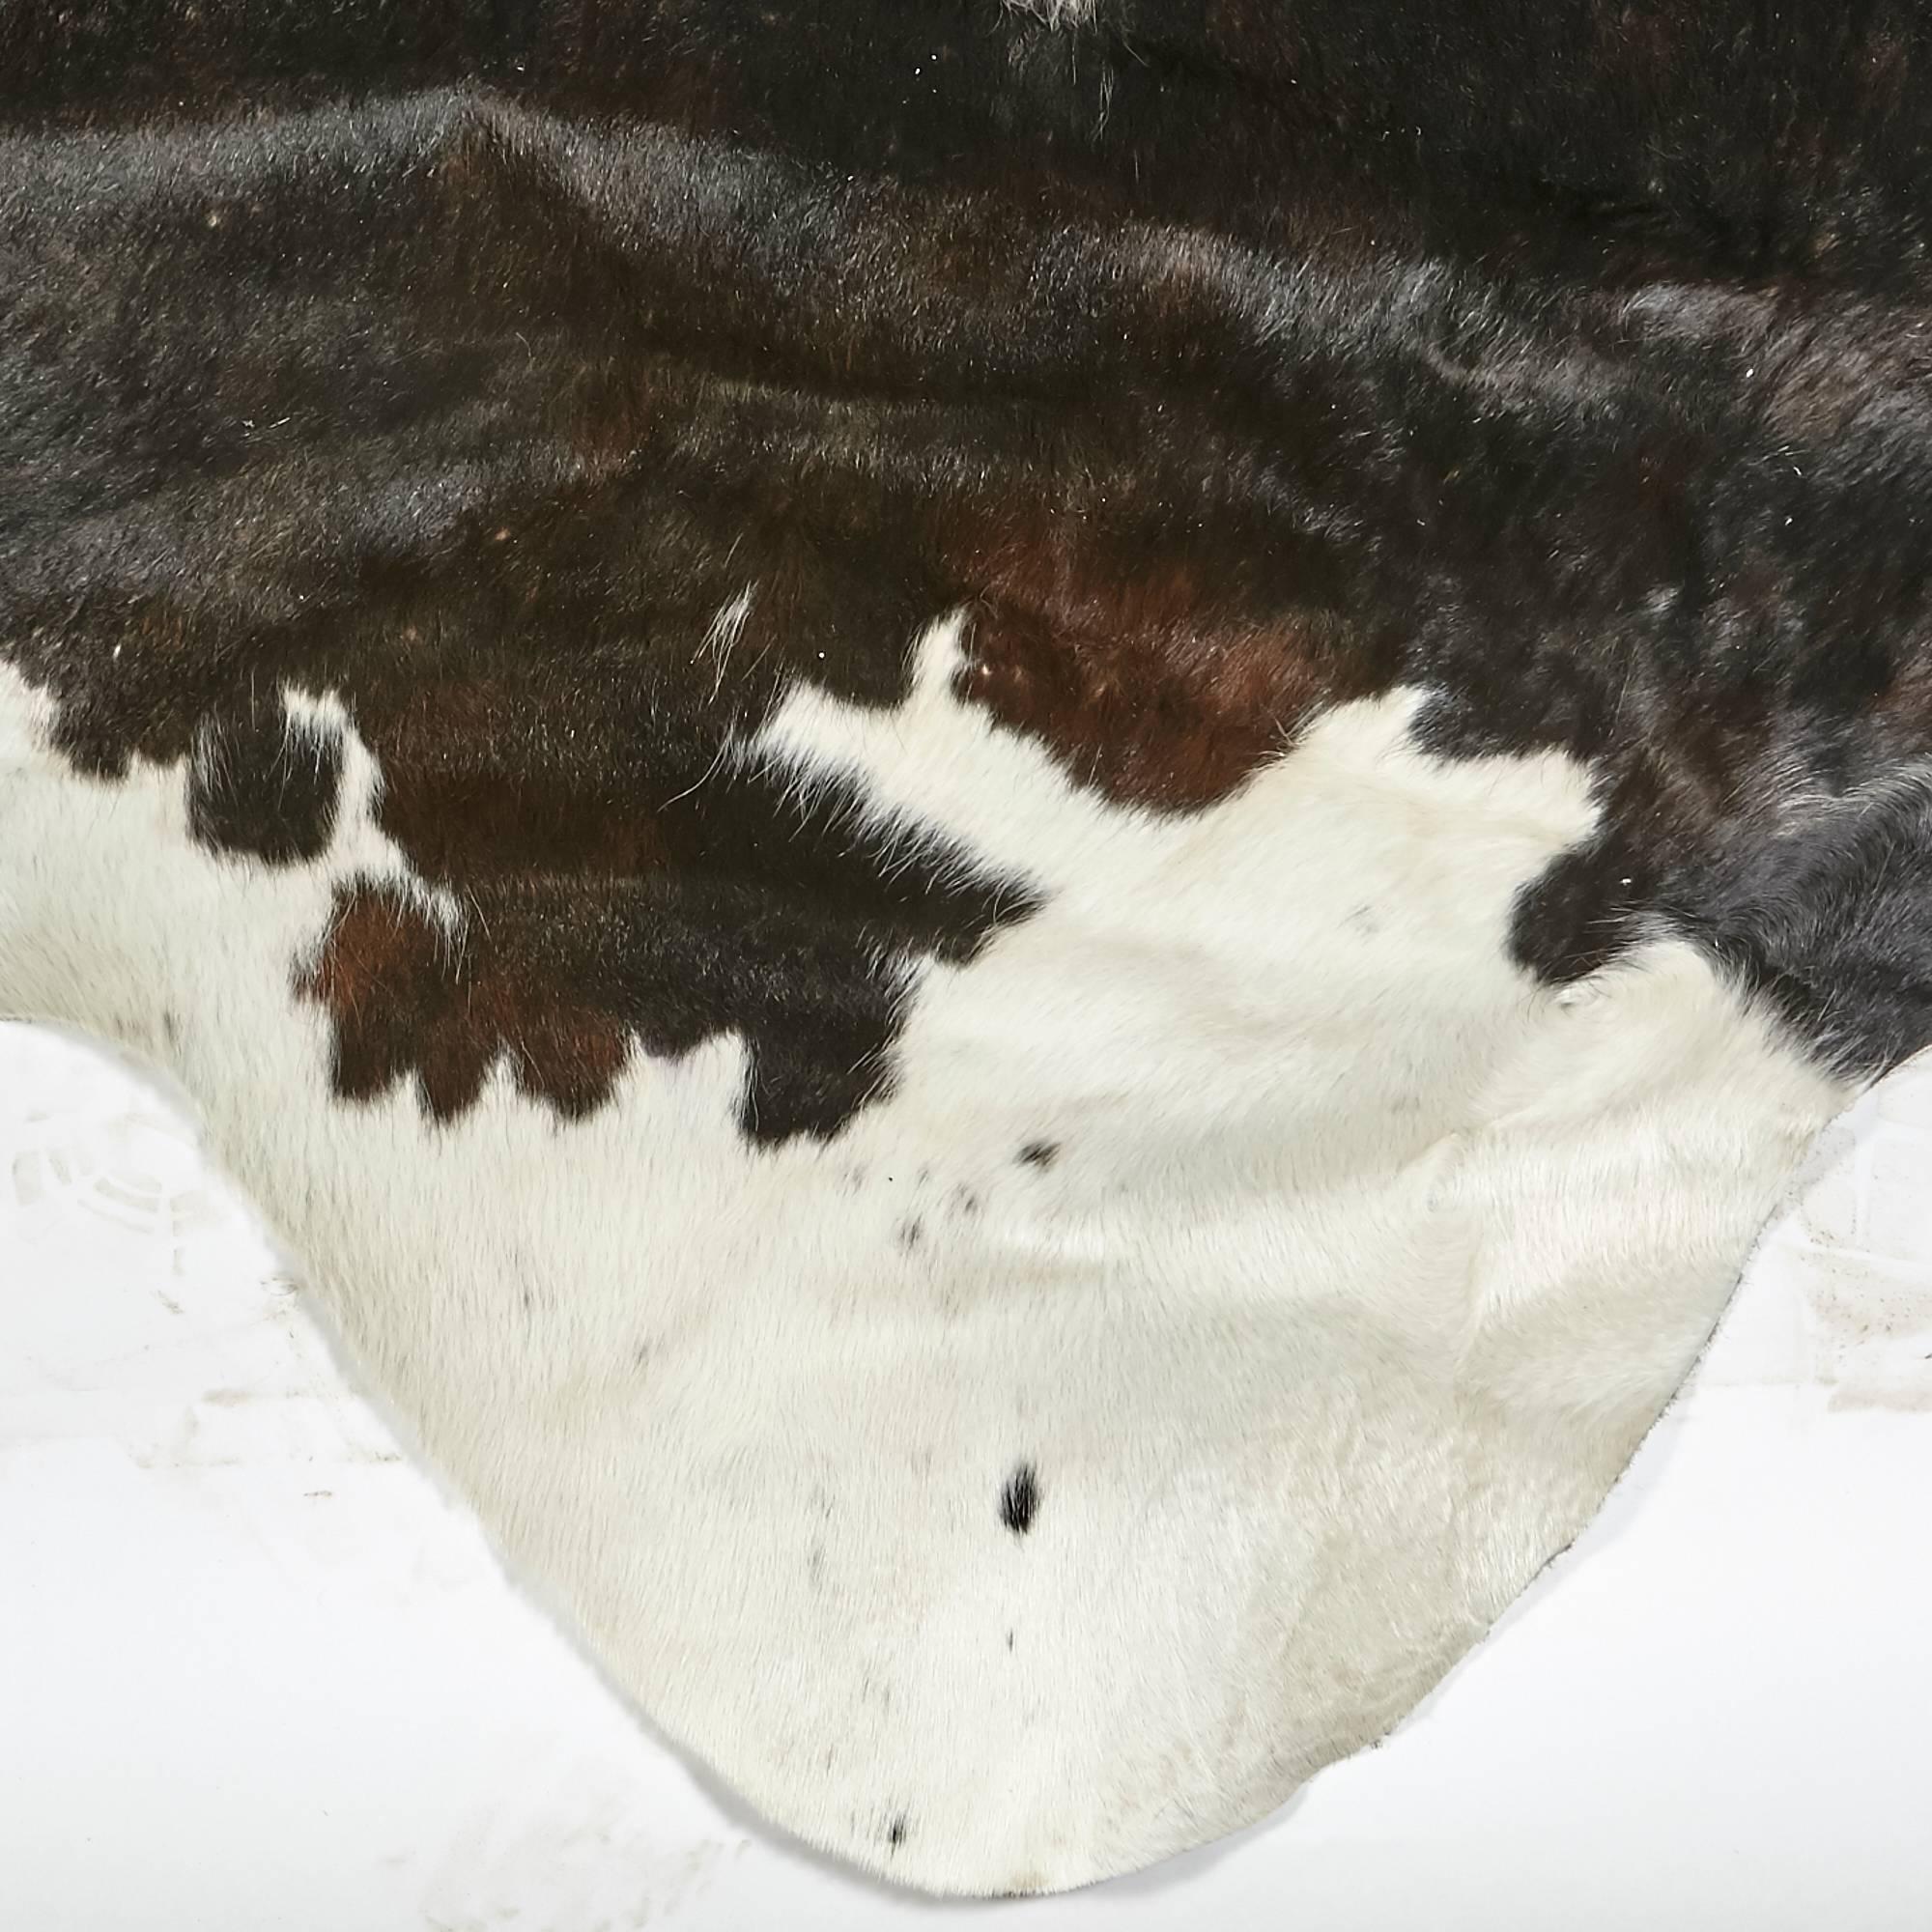 Natural Argentinian black and white cowhide rug. The rug has a hint of brown mixed in.